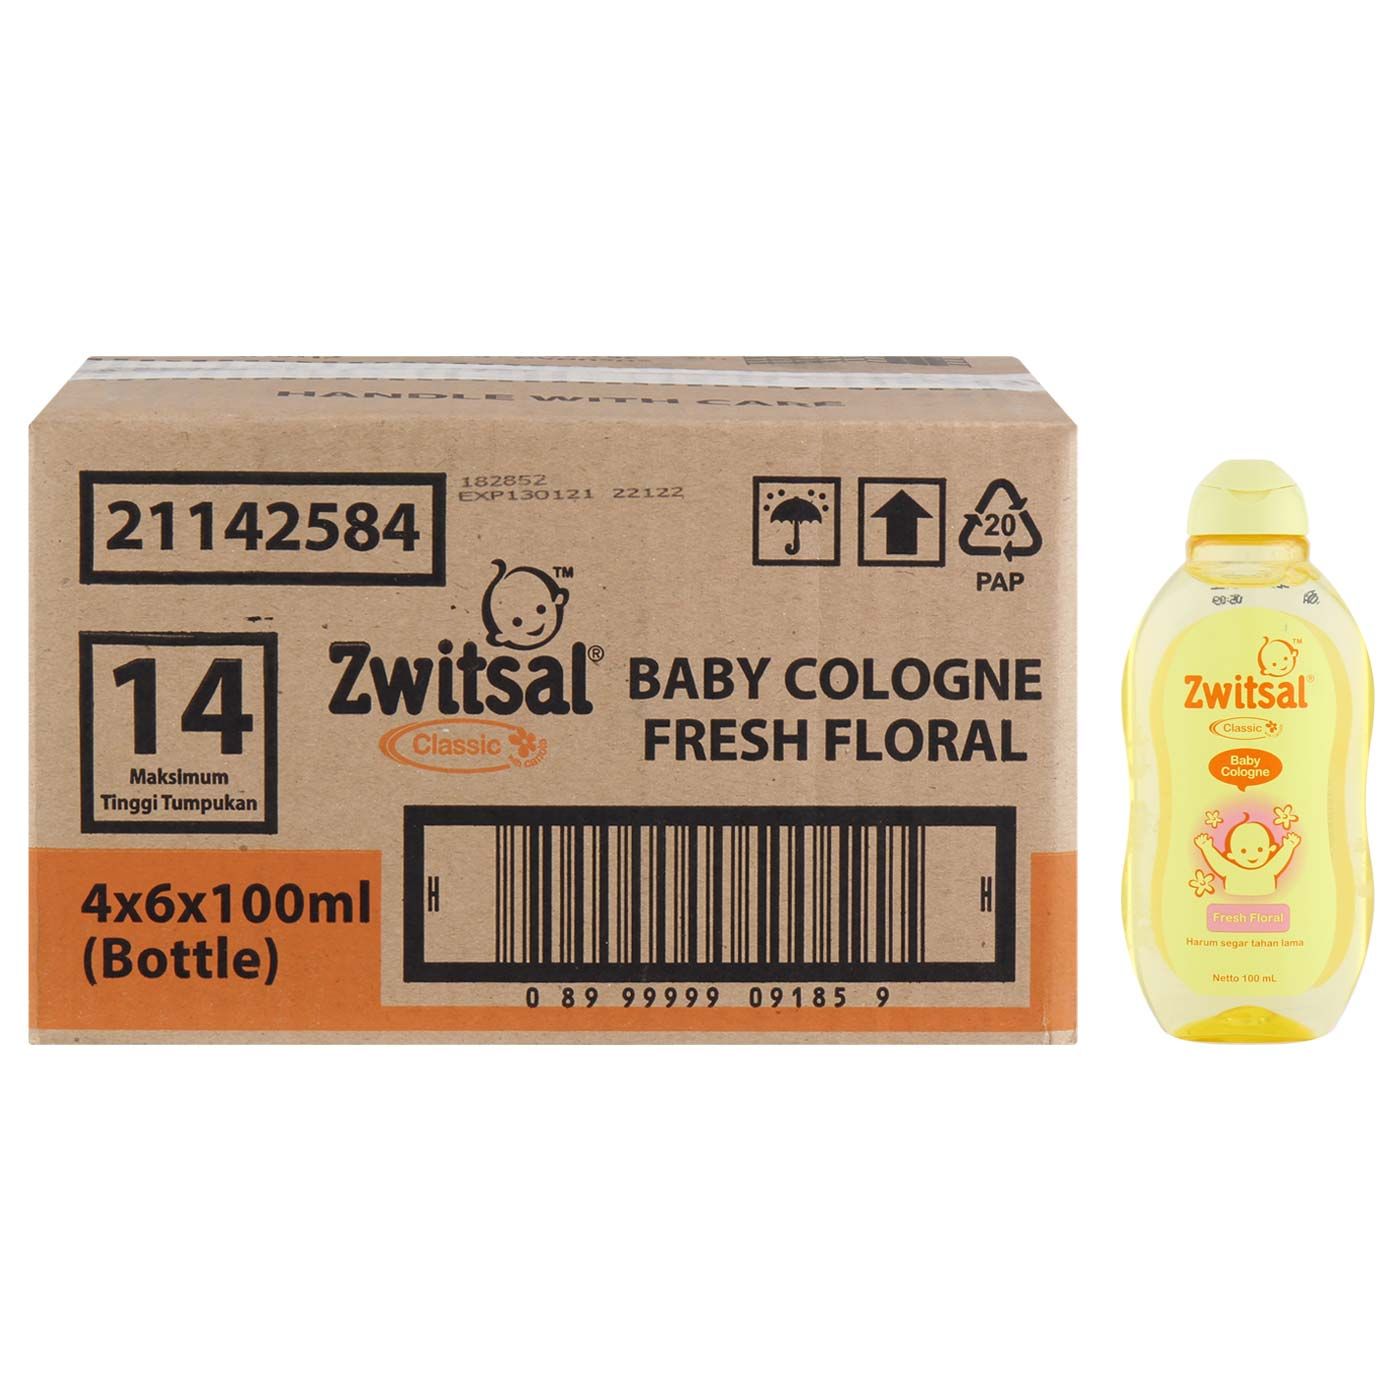 Zwitsal Baby Cologne New Fresh Floral 100ml - 3